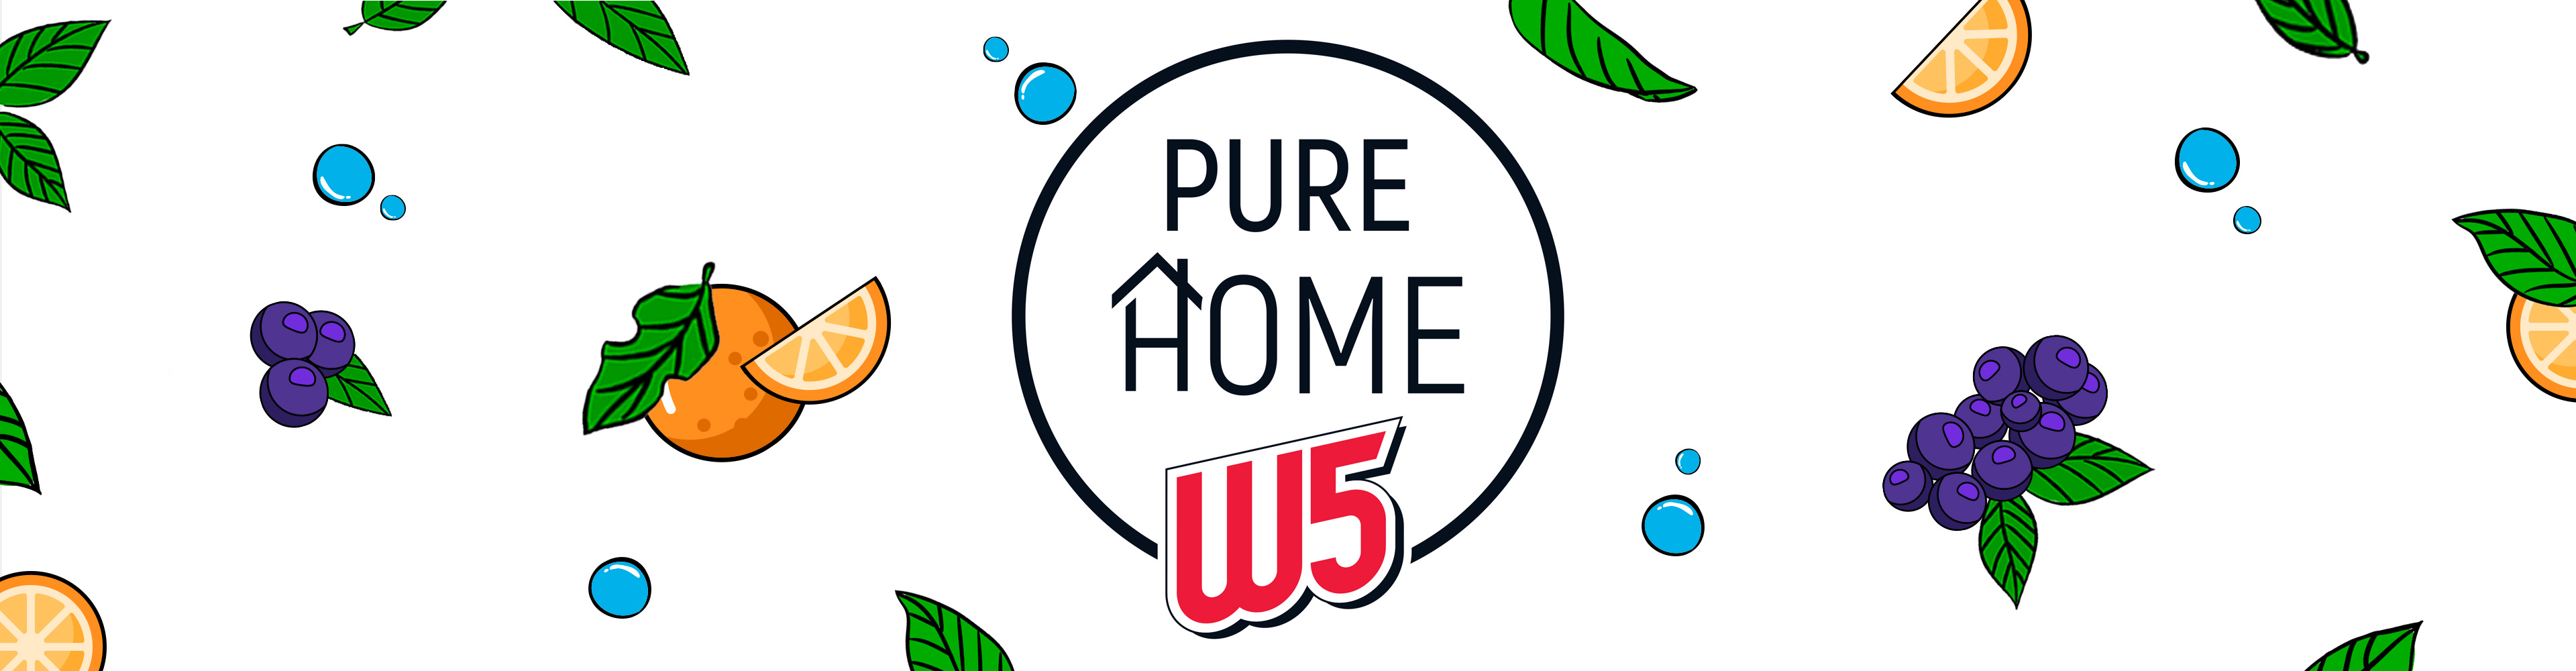 PURE HOME BY W5